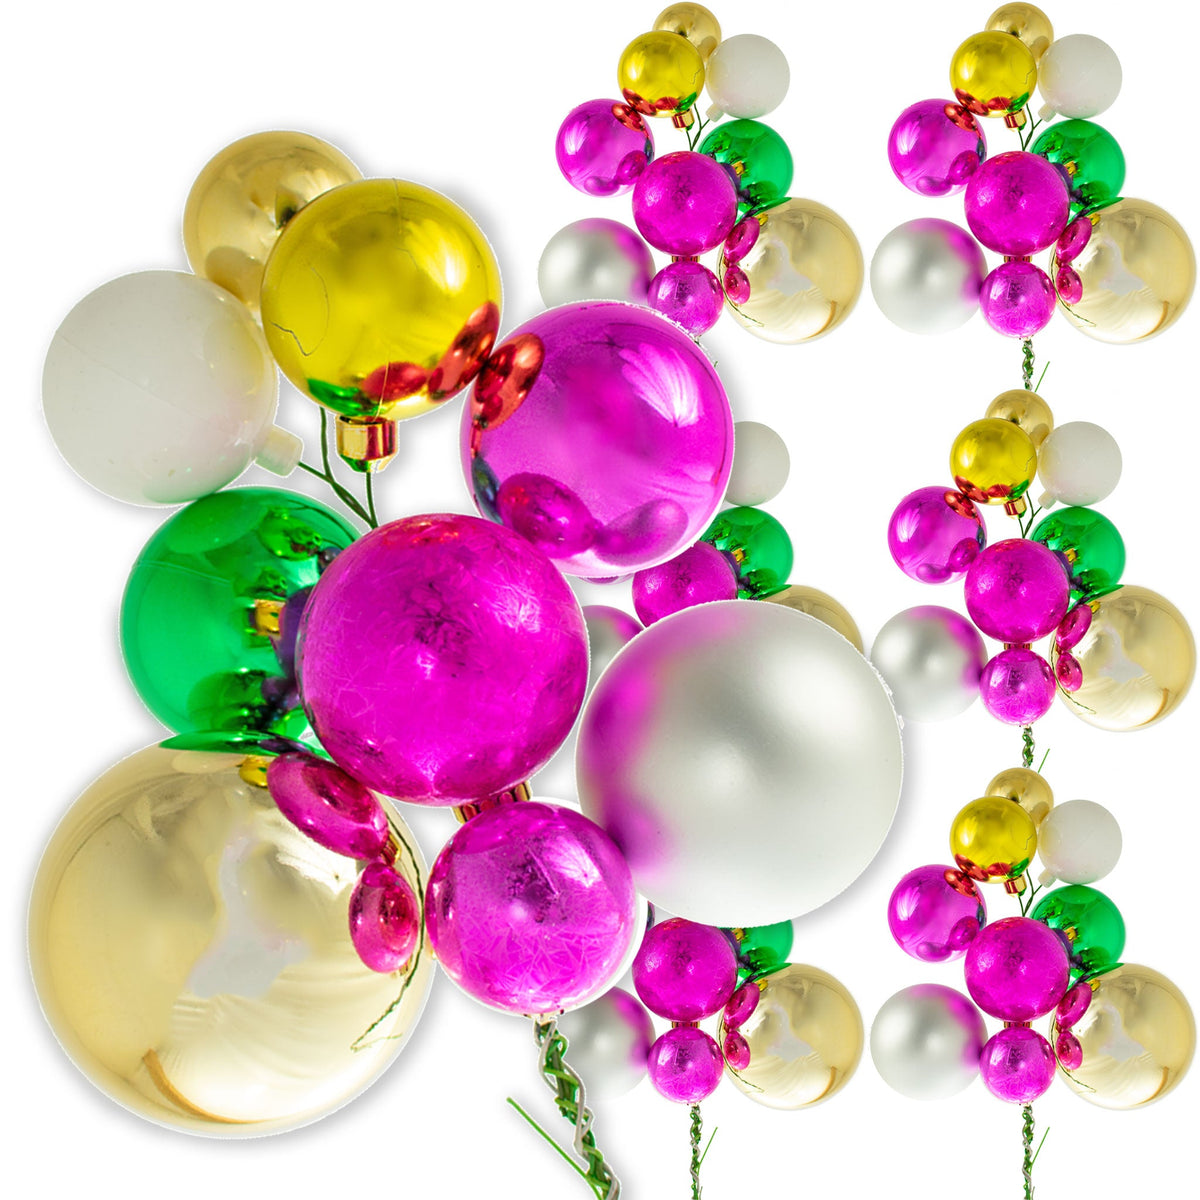 The San Francisco Christmas Ball Clusters with Shiny Multi-Color Ornaments are sold in sets of 6 from Lee Display